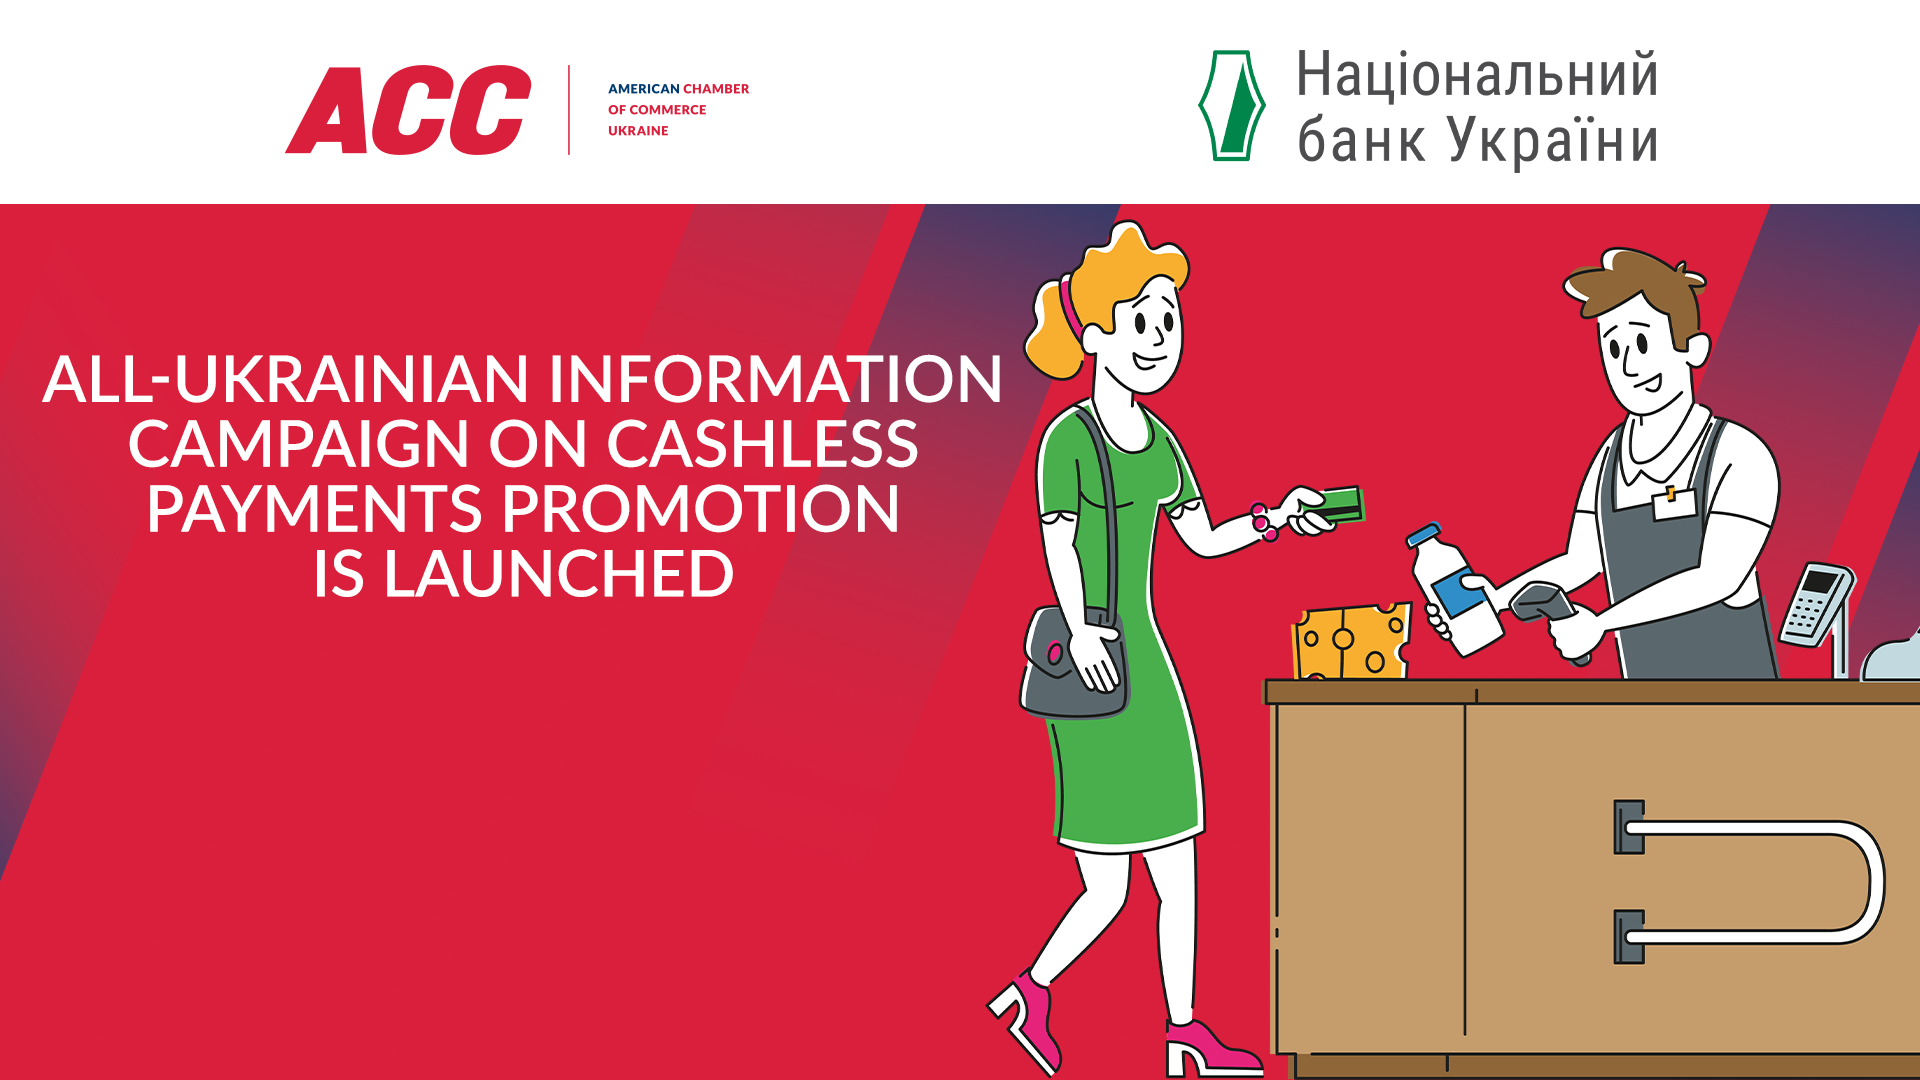 All-Ukrainian Information Campaign on Cashless Payments Promotion Is Launched